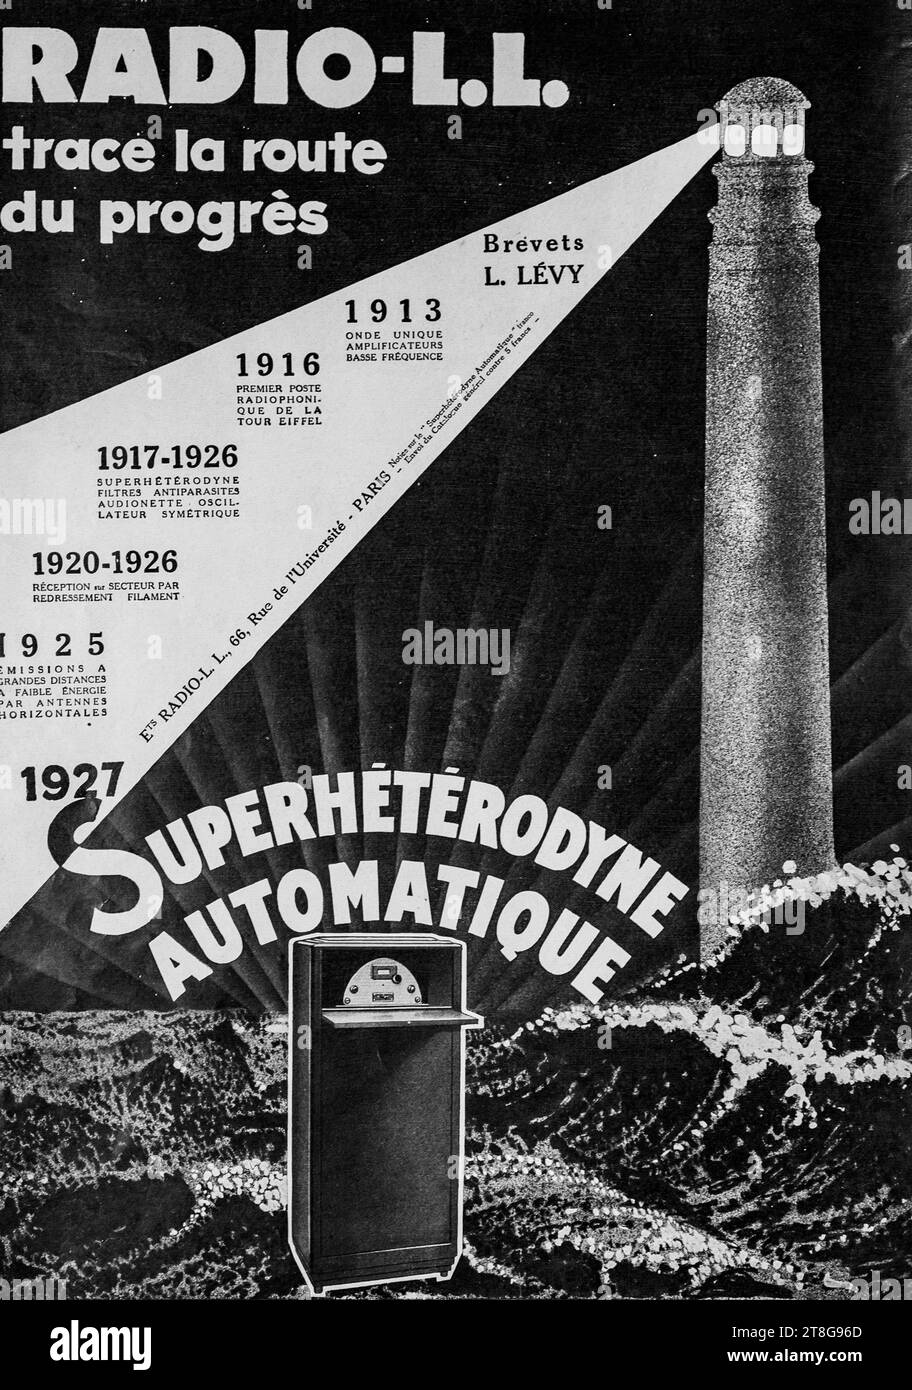 Vintage 1920s radio advertisement poster featuring historical milestones achieved in France by advances in radio technology. Stock Photo